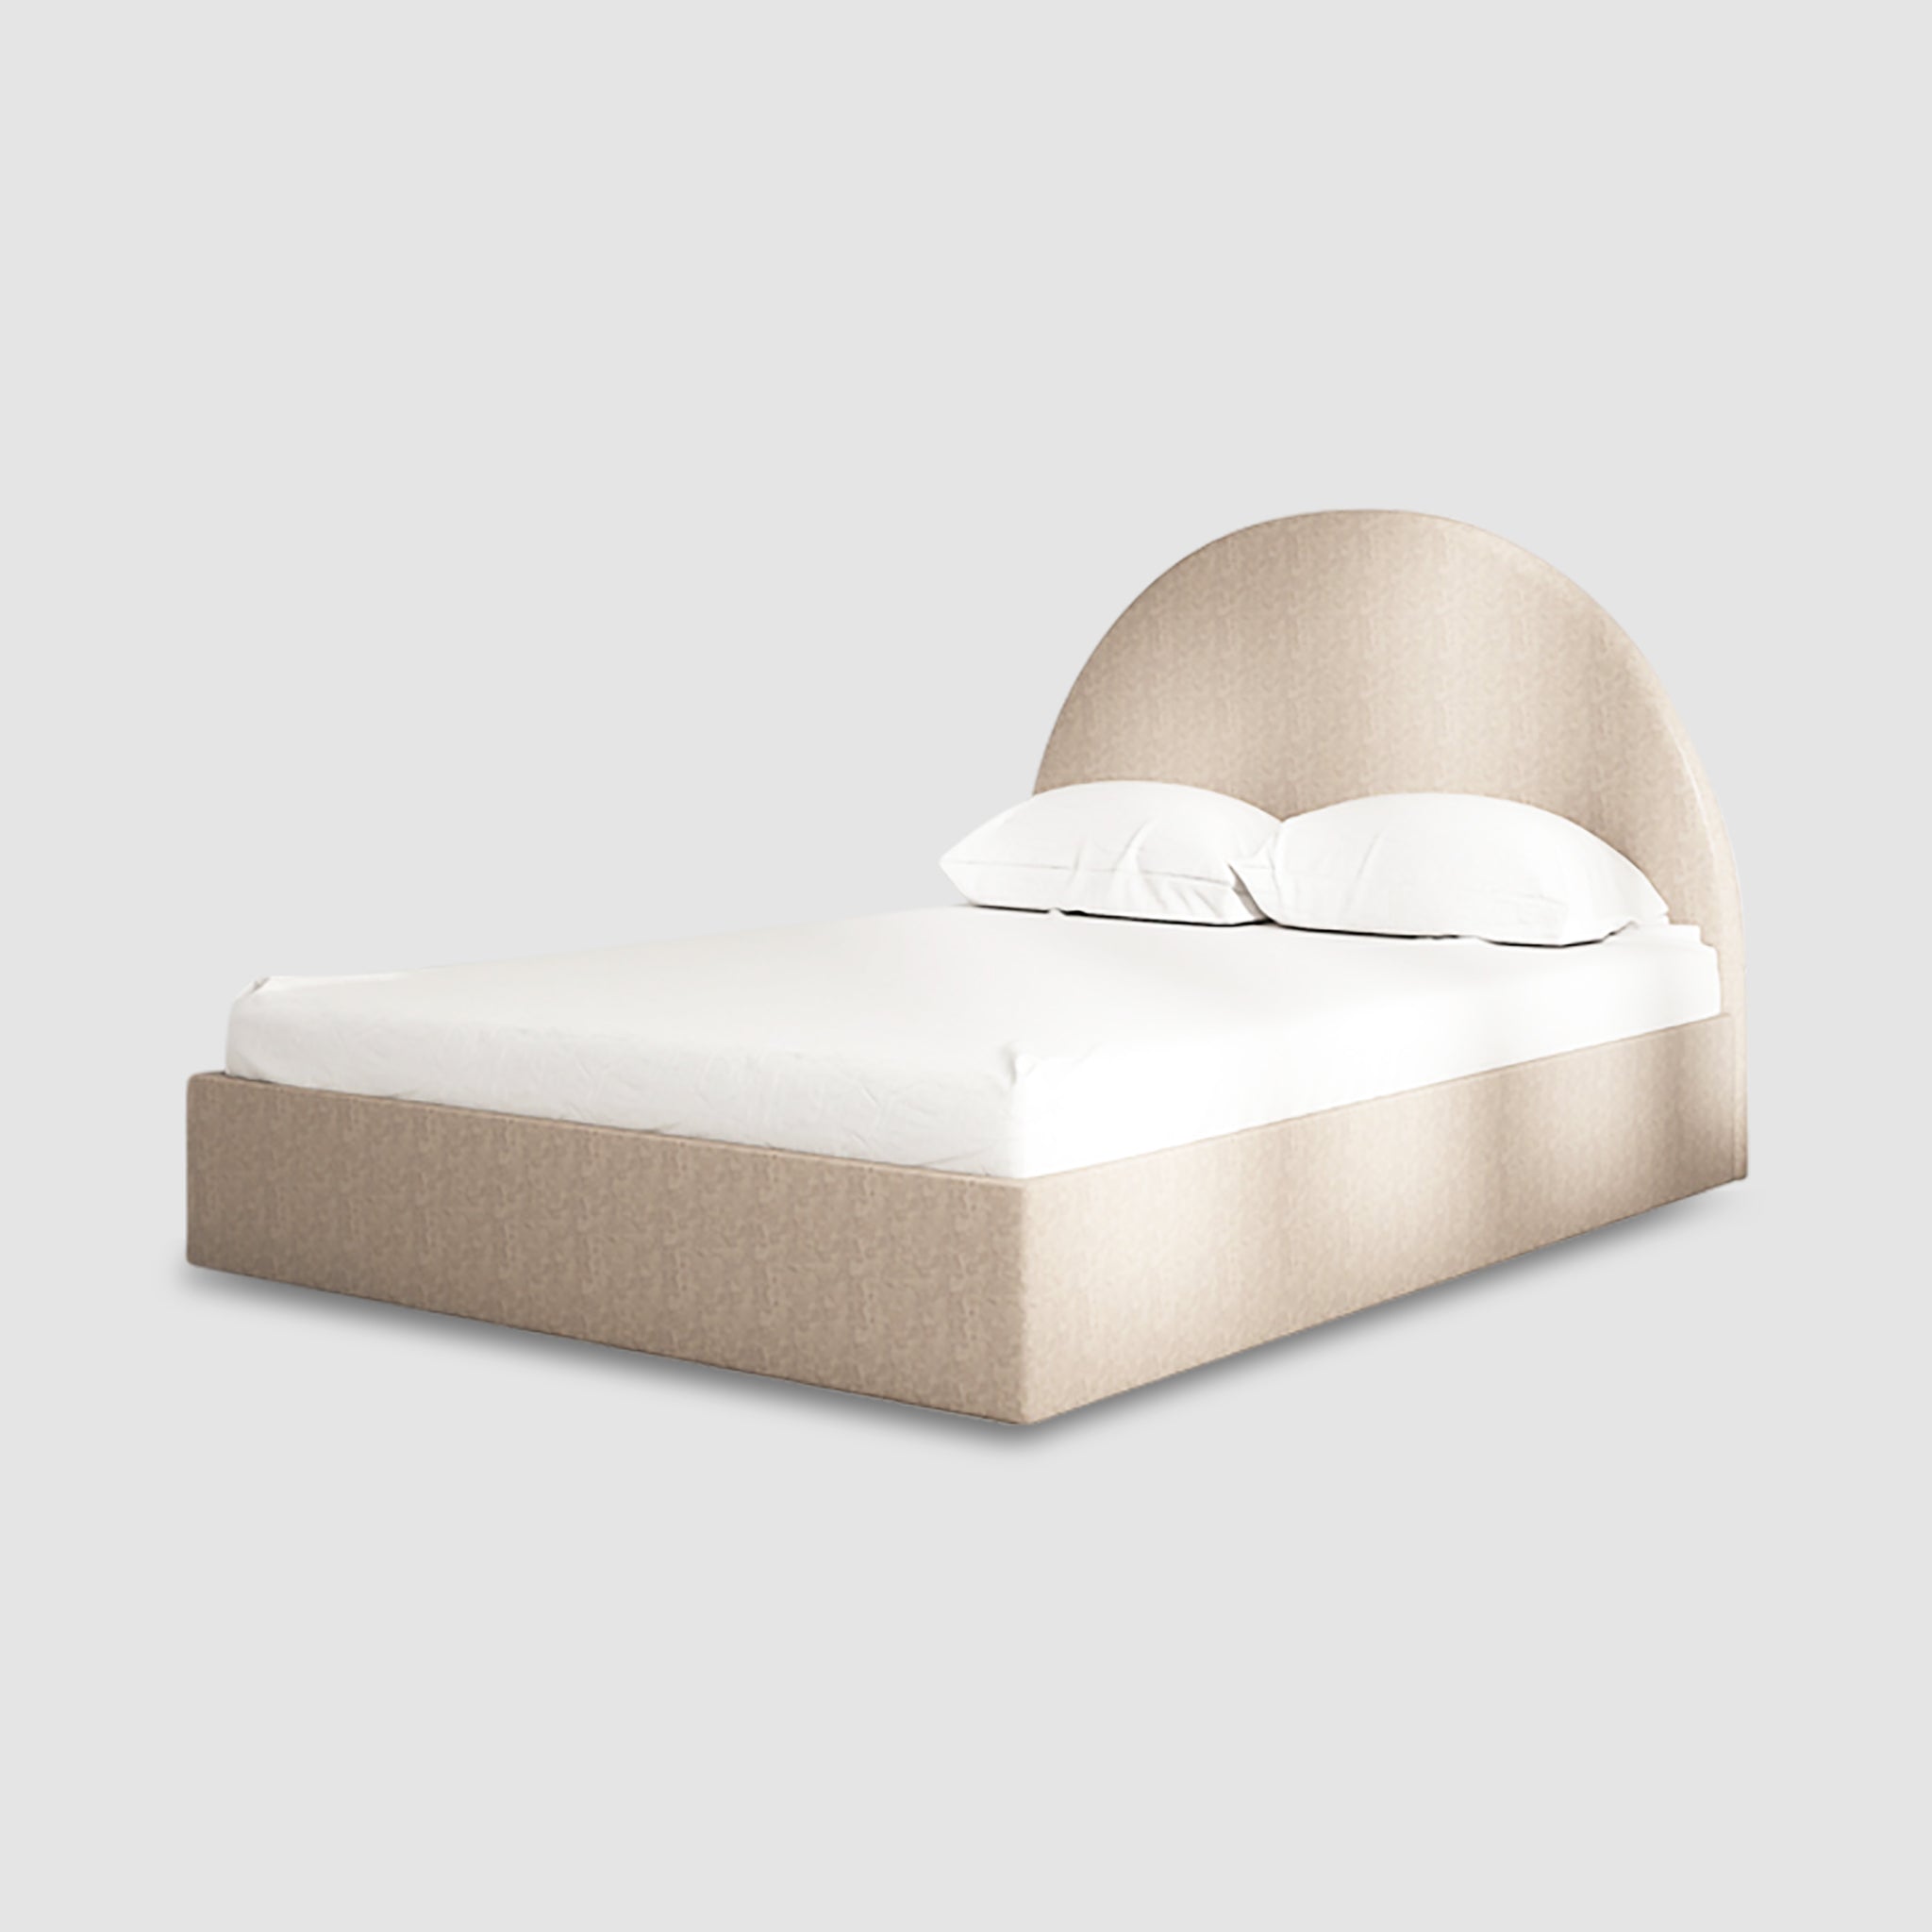 Compact and elegant Archie Bed in warm beige upholstery, perfect for any bedroom.